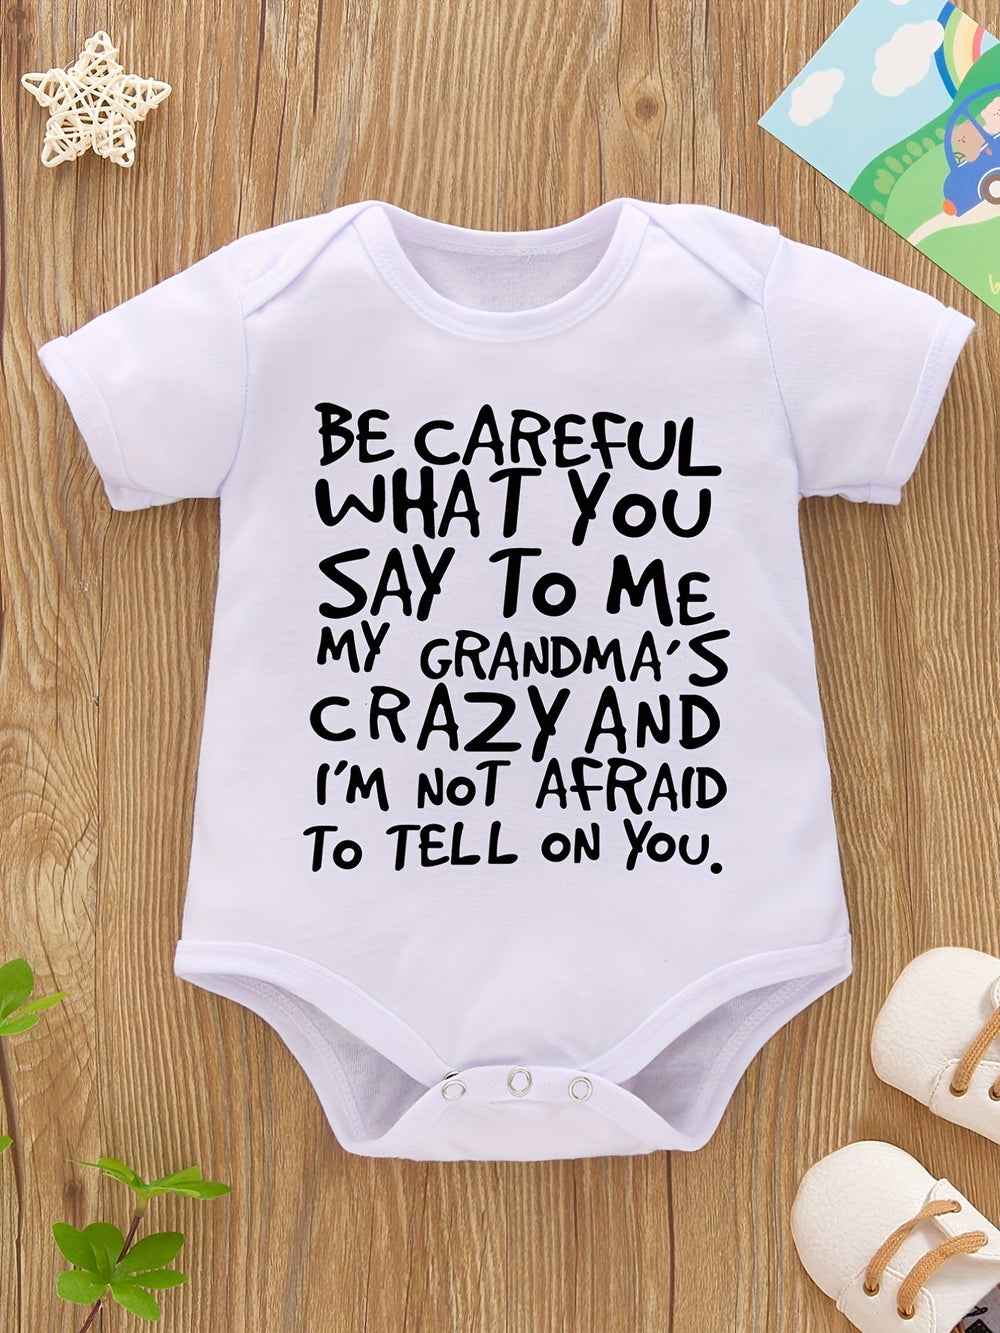 Newborn Babies Watch Out I Have Crazy Grandma Print Short Sleeve Onesies Rompers - Gen U Us Products